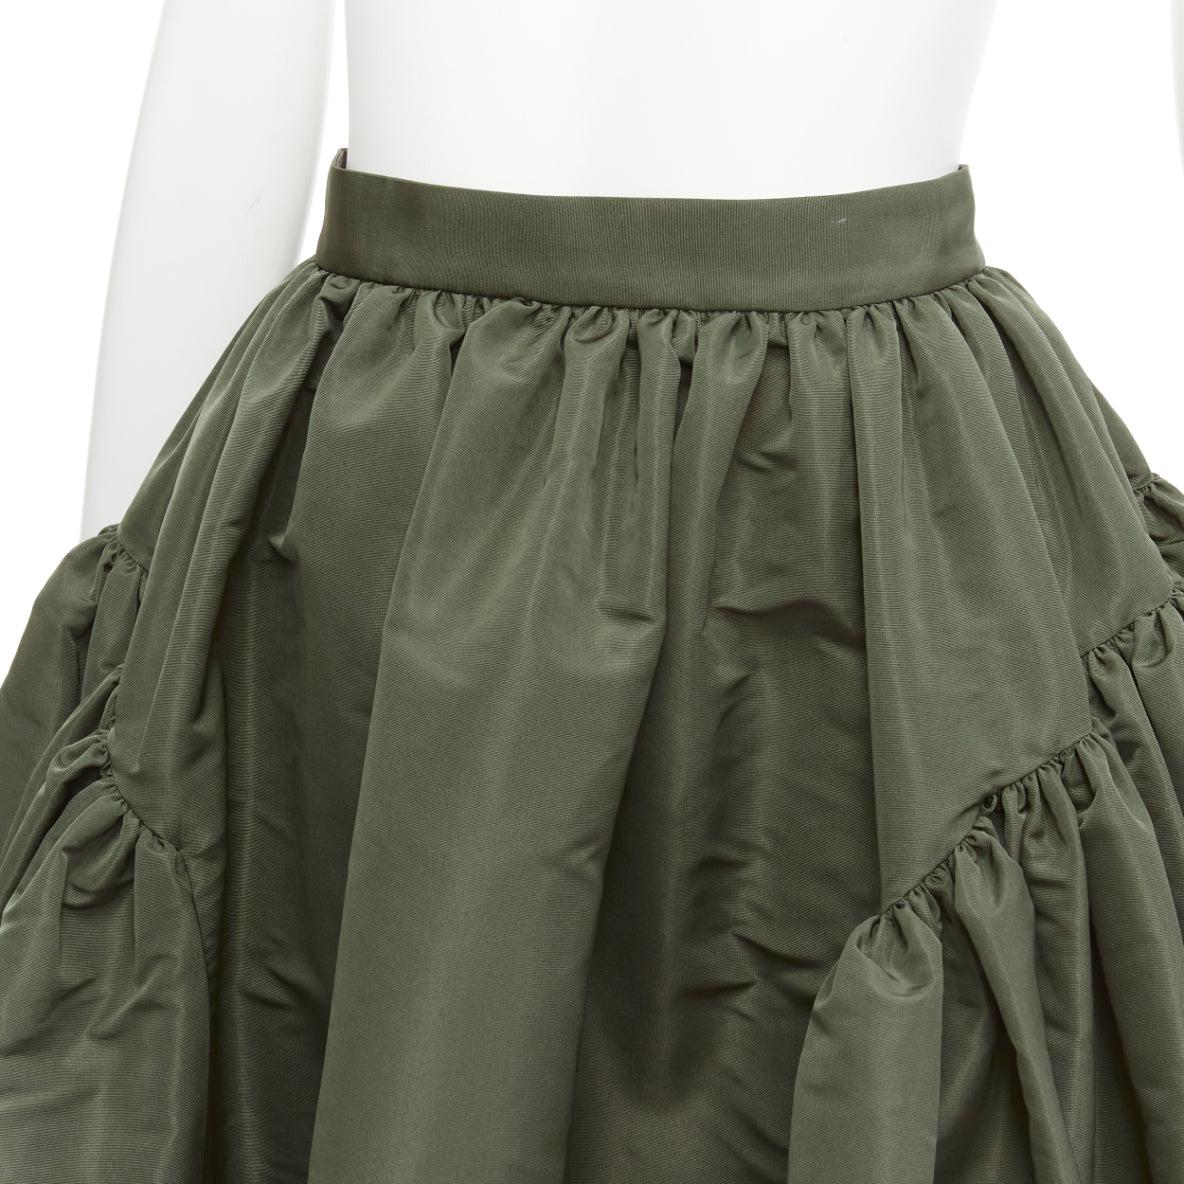 ALEXANDER MCQUEEN 2021 green khaki high waisted midi full skirt IT38 XS
Reference: AAWC/A00954
Brand: Alexander McQueen
Designer: Sarah Burton
Collection: 2021
Material: Polyester
Color: Green
Pattern: Solid
Closure: Zip
Extra Details: Back